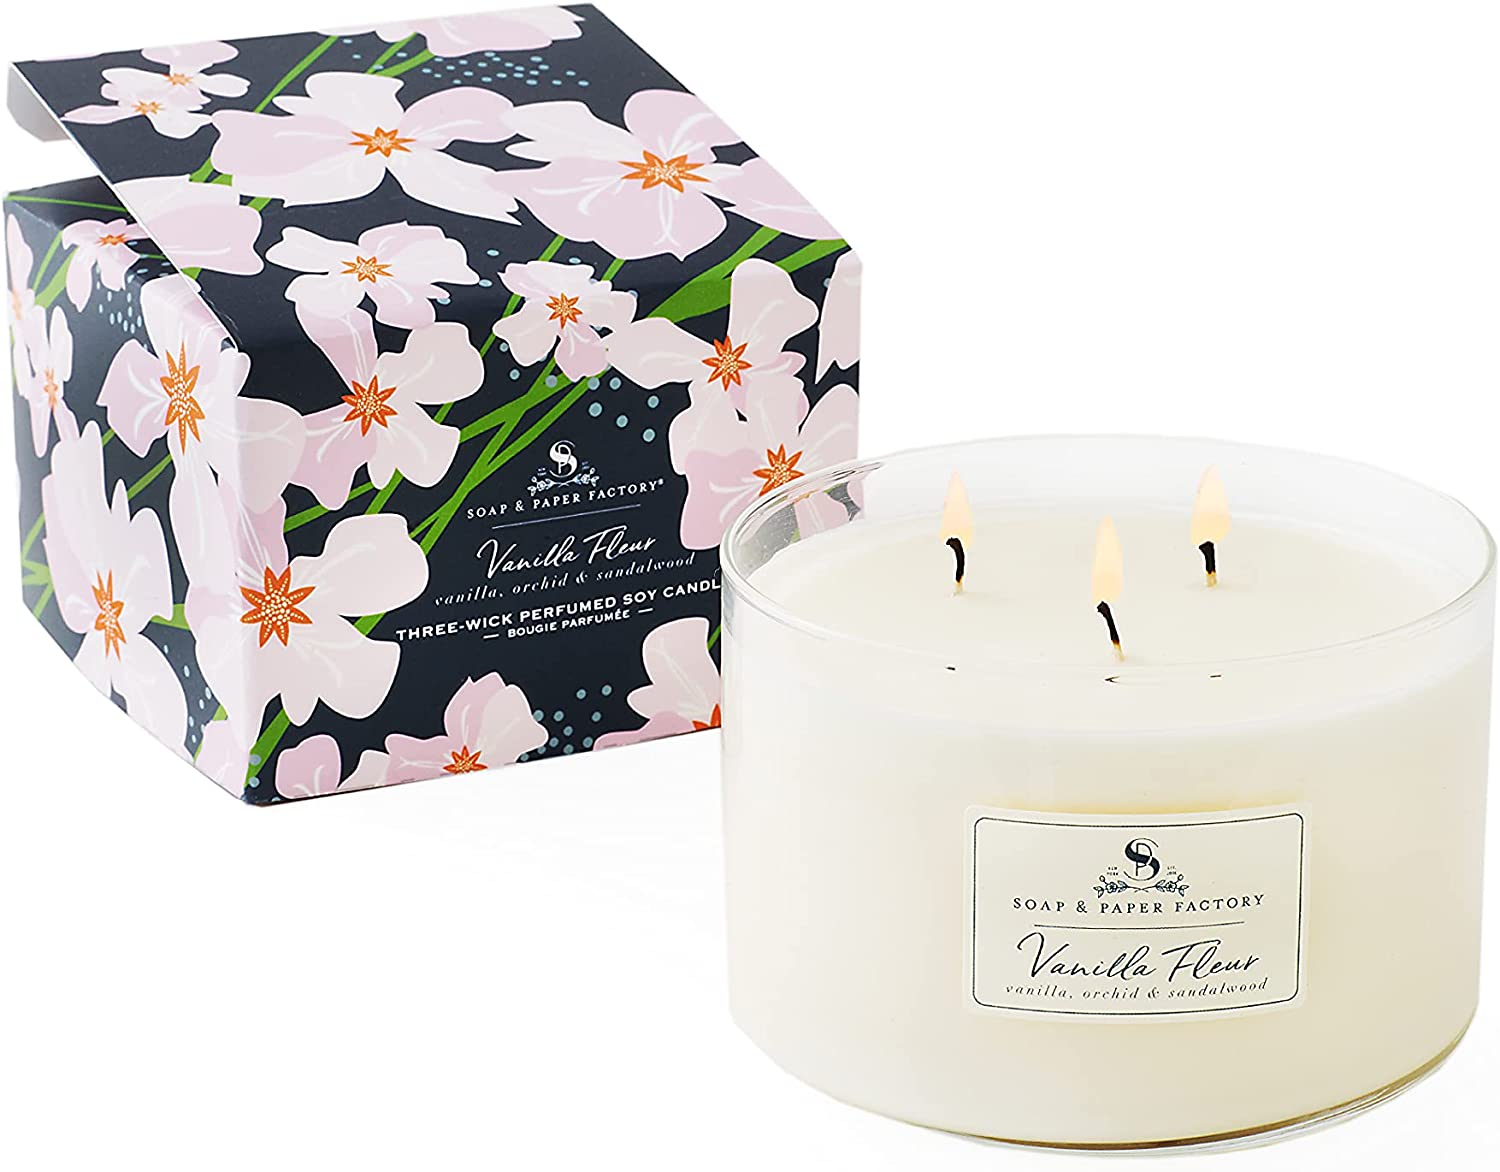 Soap and Paper Factory Vanilla Fleur Three-Wick Soy Candle, 18 oz